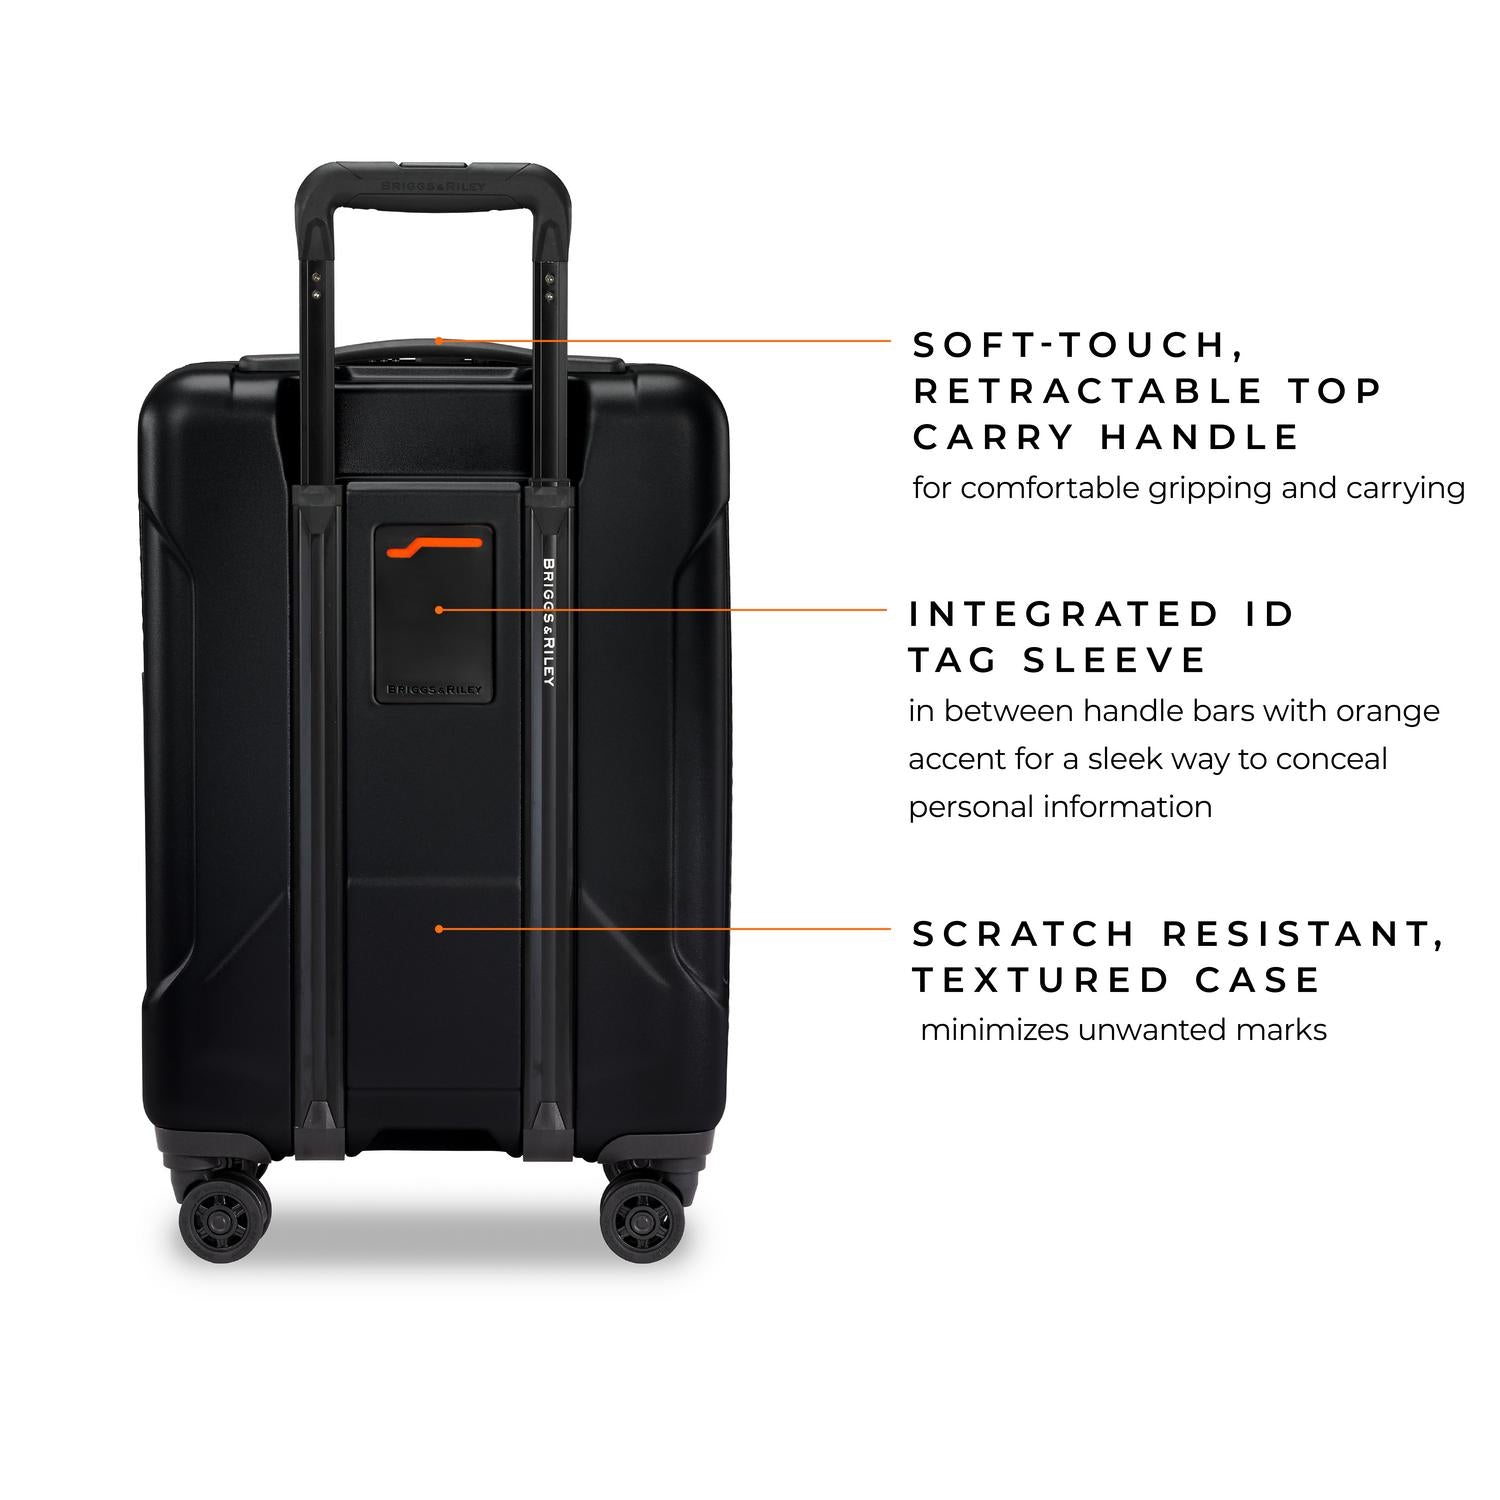 briggs & riley torq black international 21" carry-on spinner soft-touch retractable top carry handle for comfortable gripping and carrying, integrated id tag sleeve in between handle bars with orange accent for a sleek way to conceal personal information, scratch resistant textured case minimizes unwanted marks #color_stealth